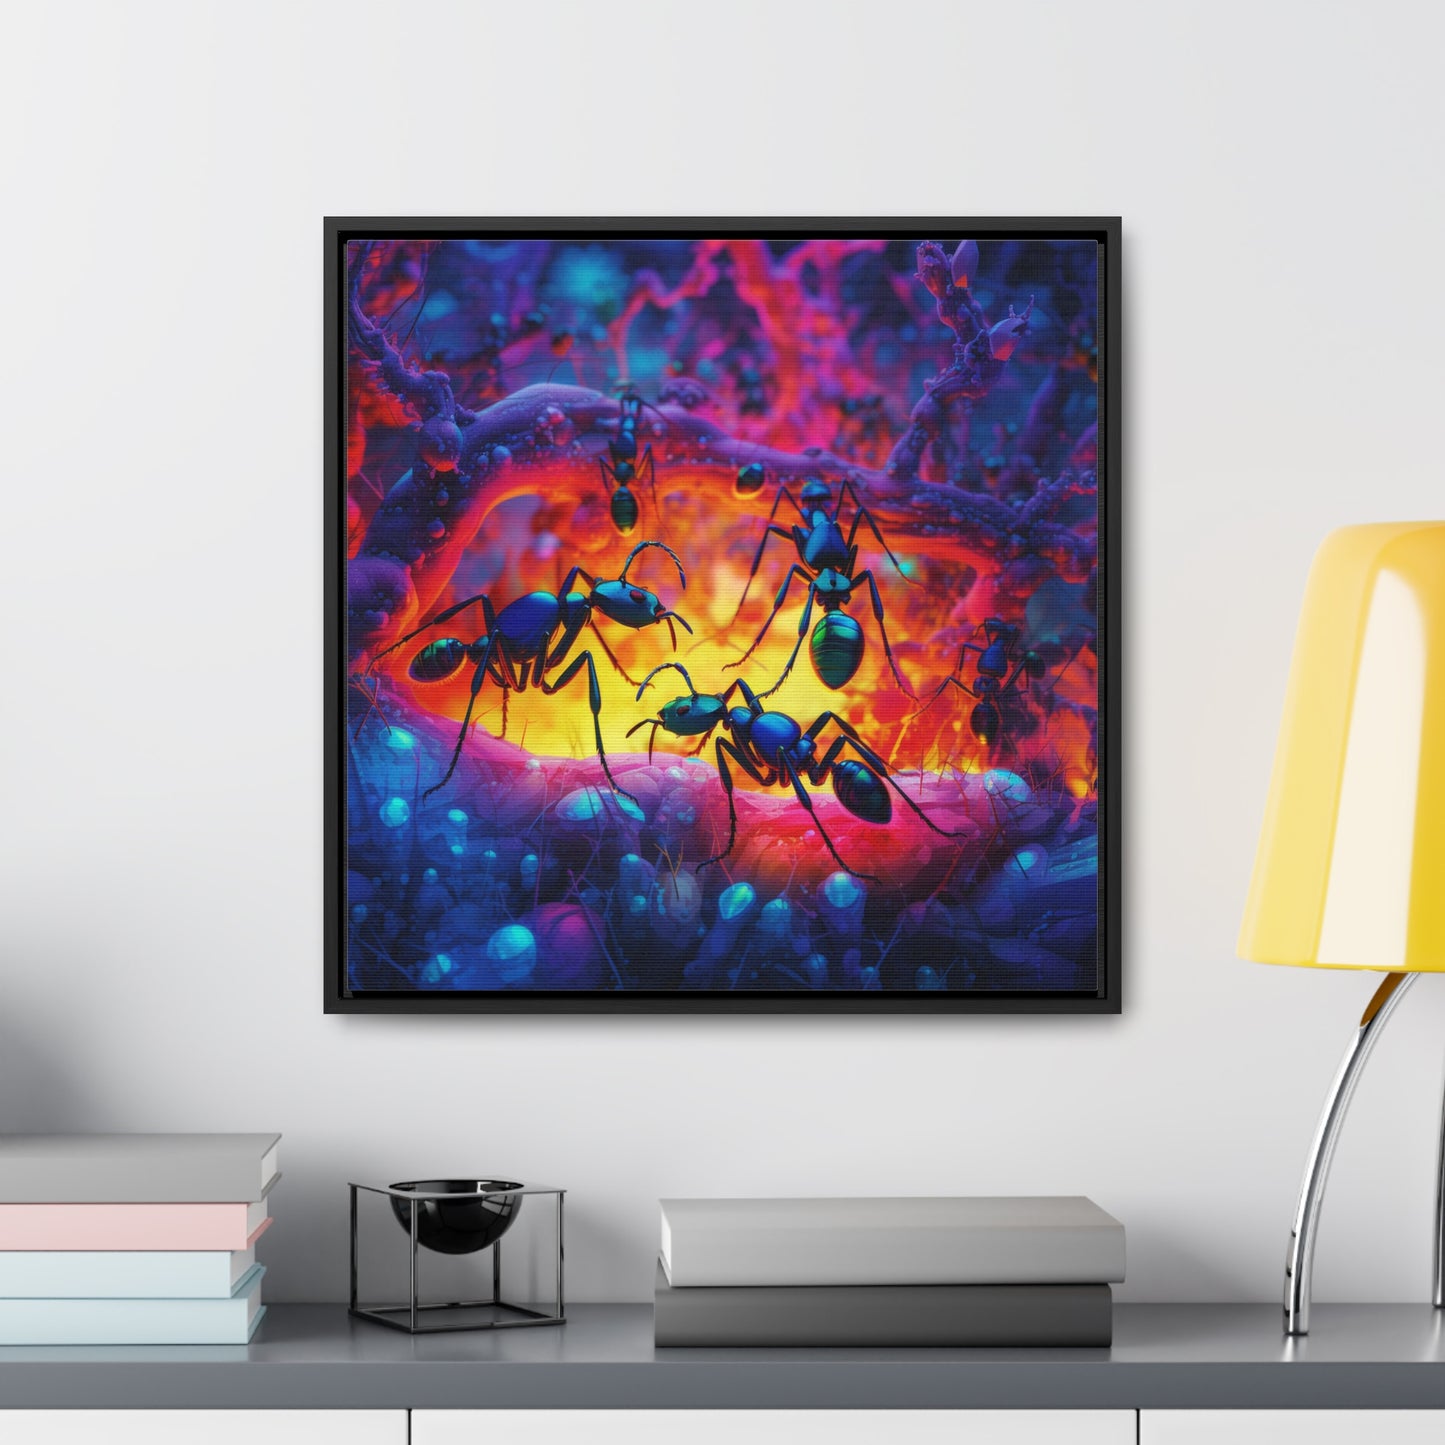 Gallery Canvas Wraps, Square Frame Ants Home 3